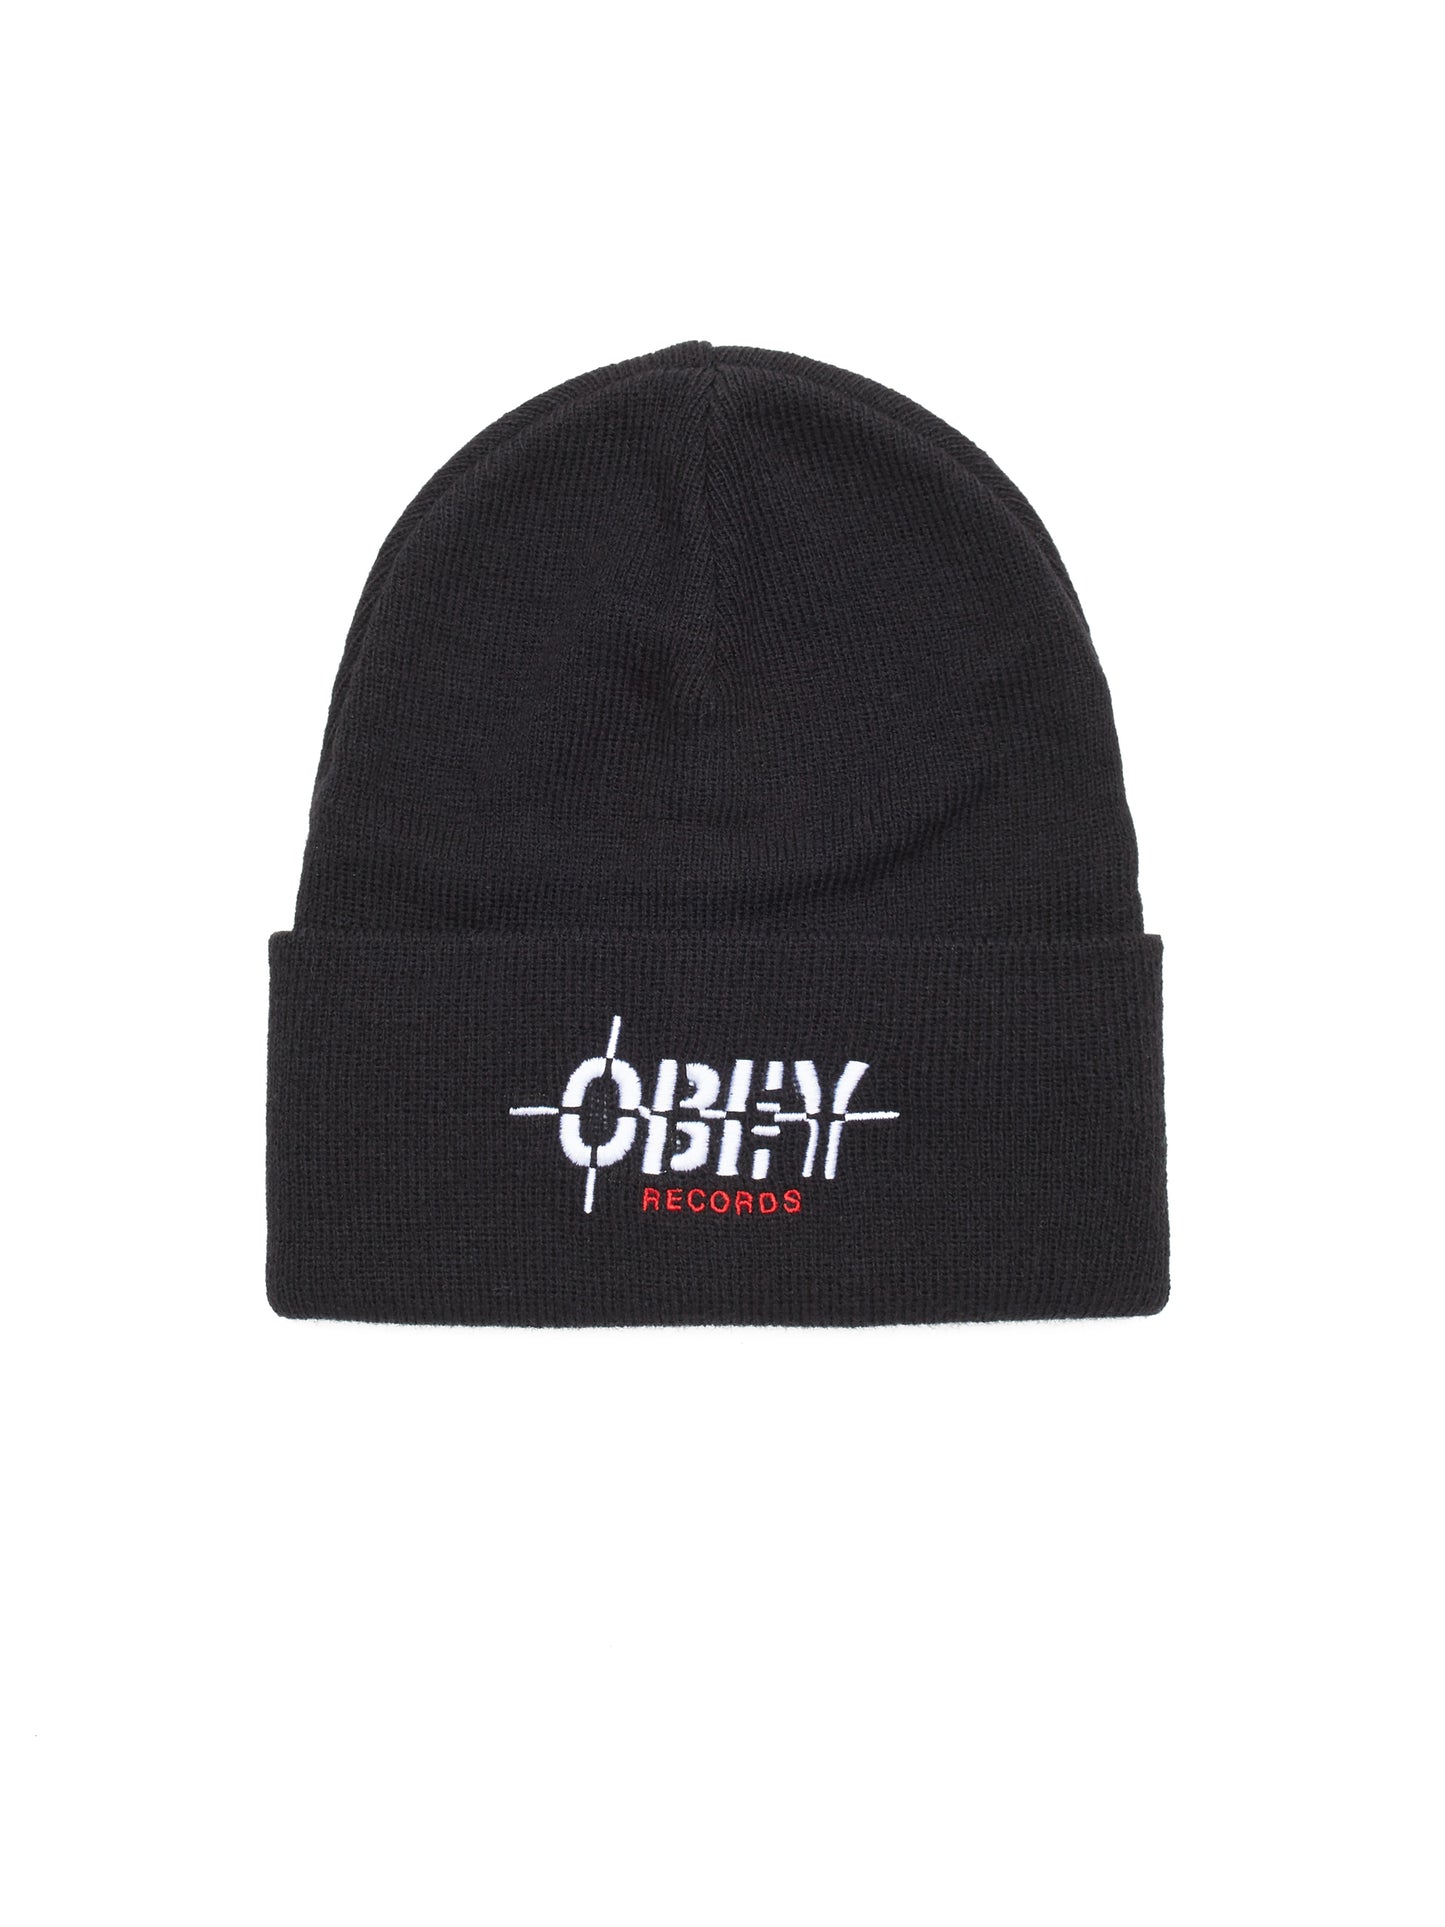 OBEY - Records Beanie, Black